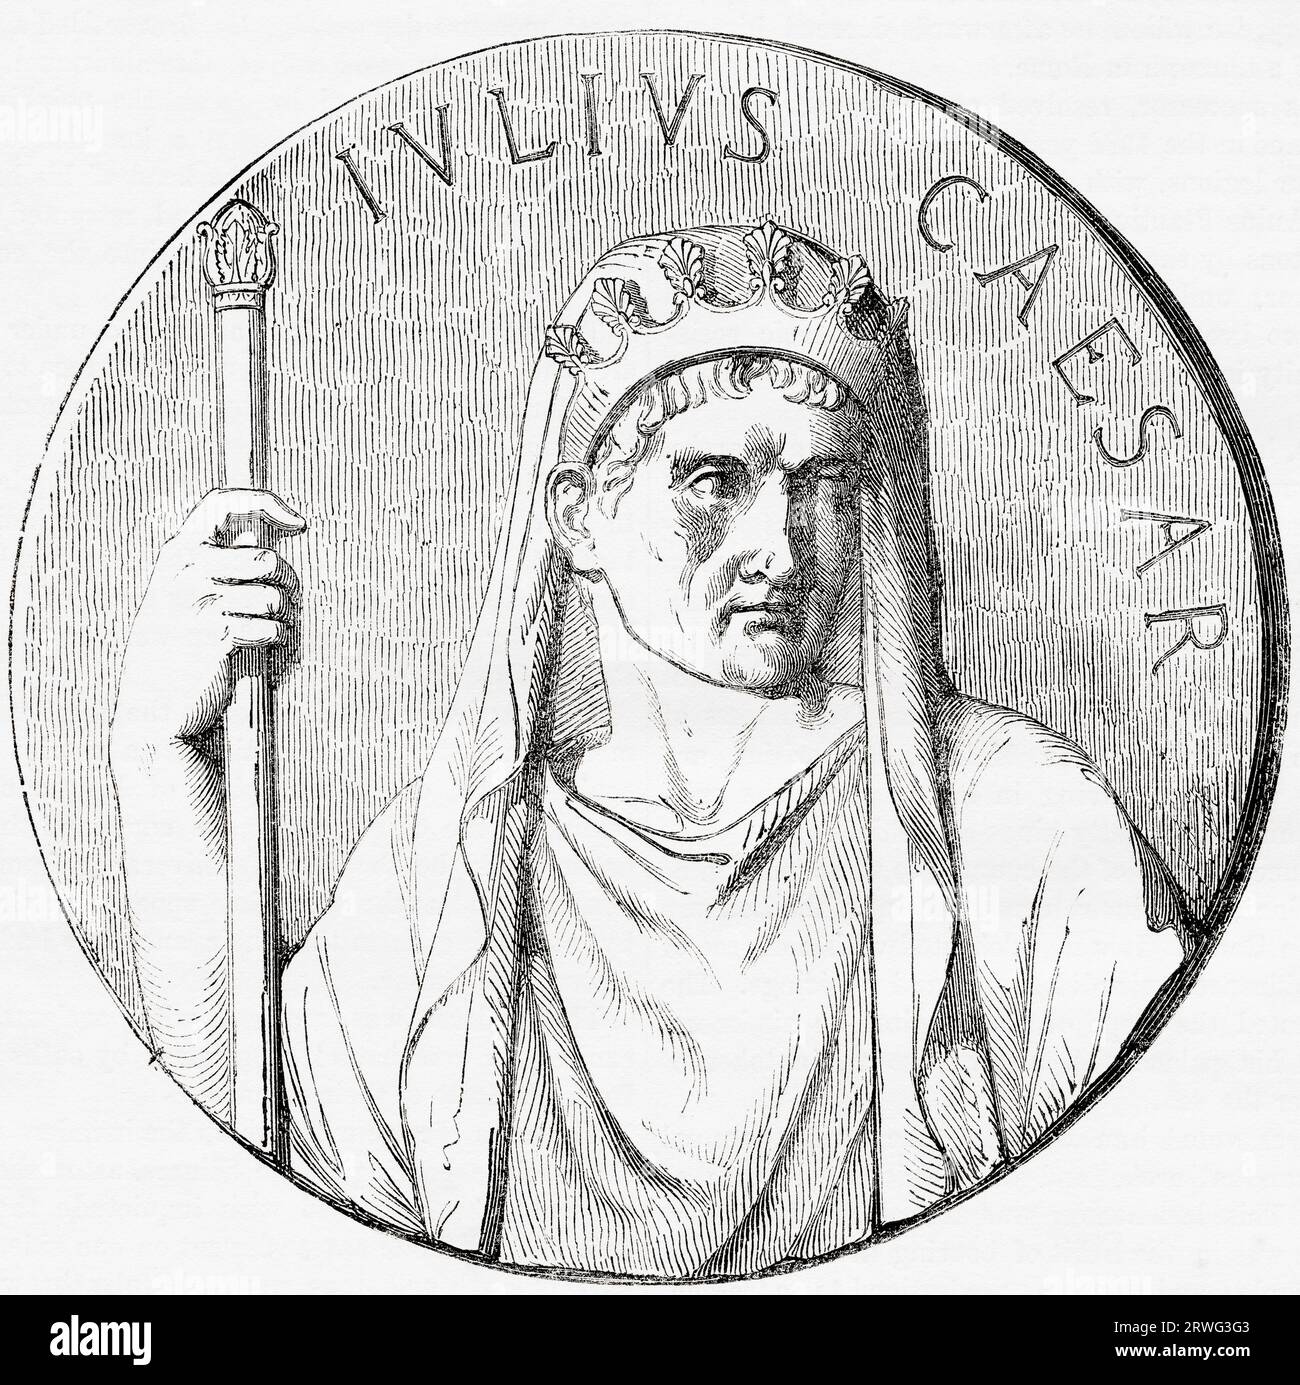 Julius Caesar, 100 BC-44 BC.  Dictator of the Roman Republic, military general, politician, author of his own histories.  From Cassell's Illustrated History of England, published 1857. Stock Photo